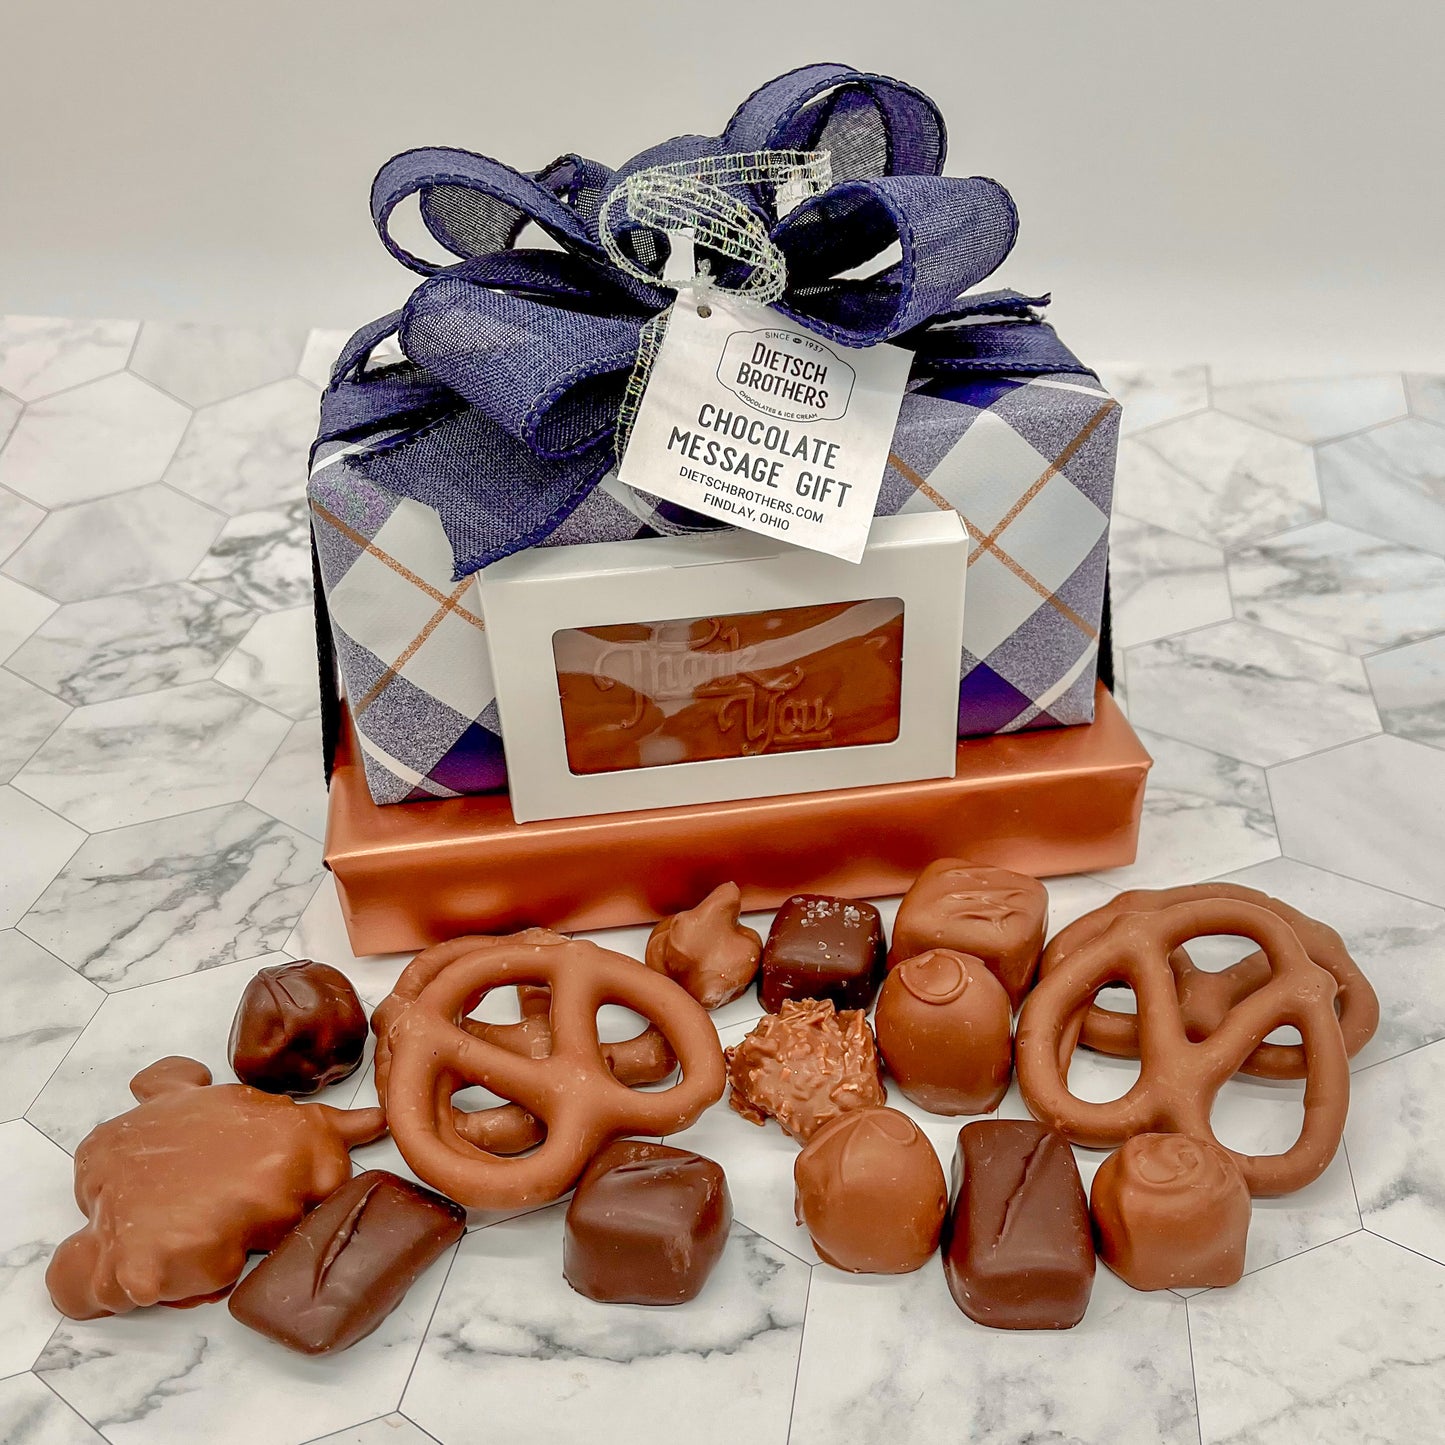 Chocolate Message Gift